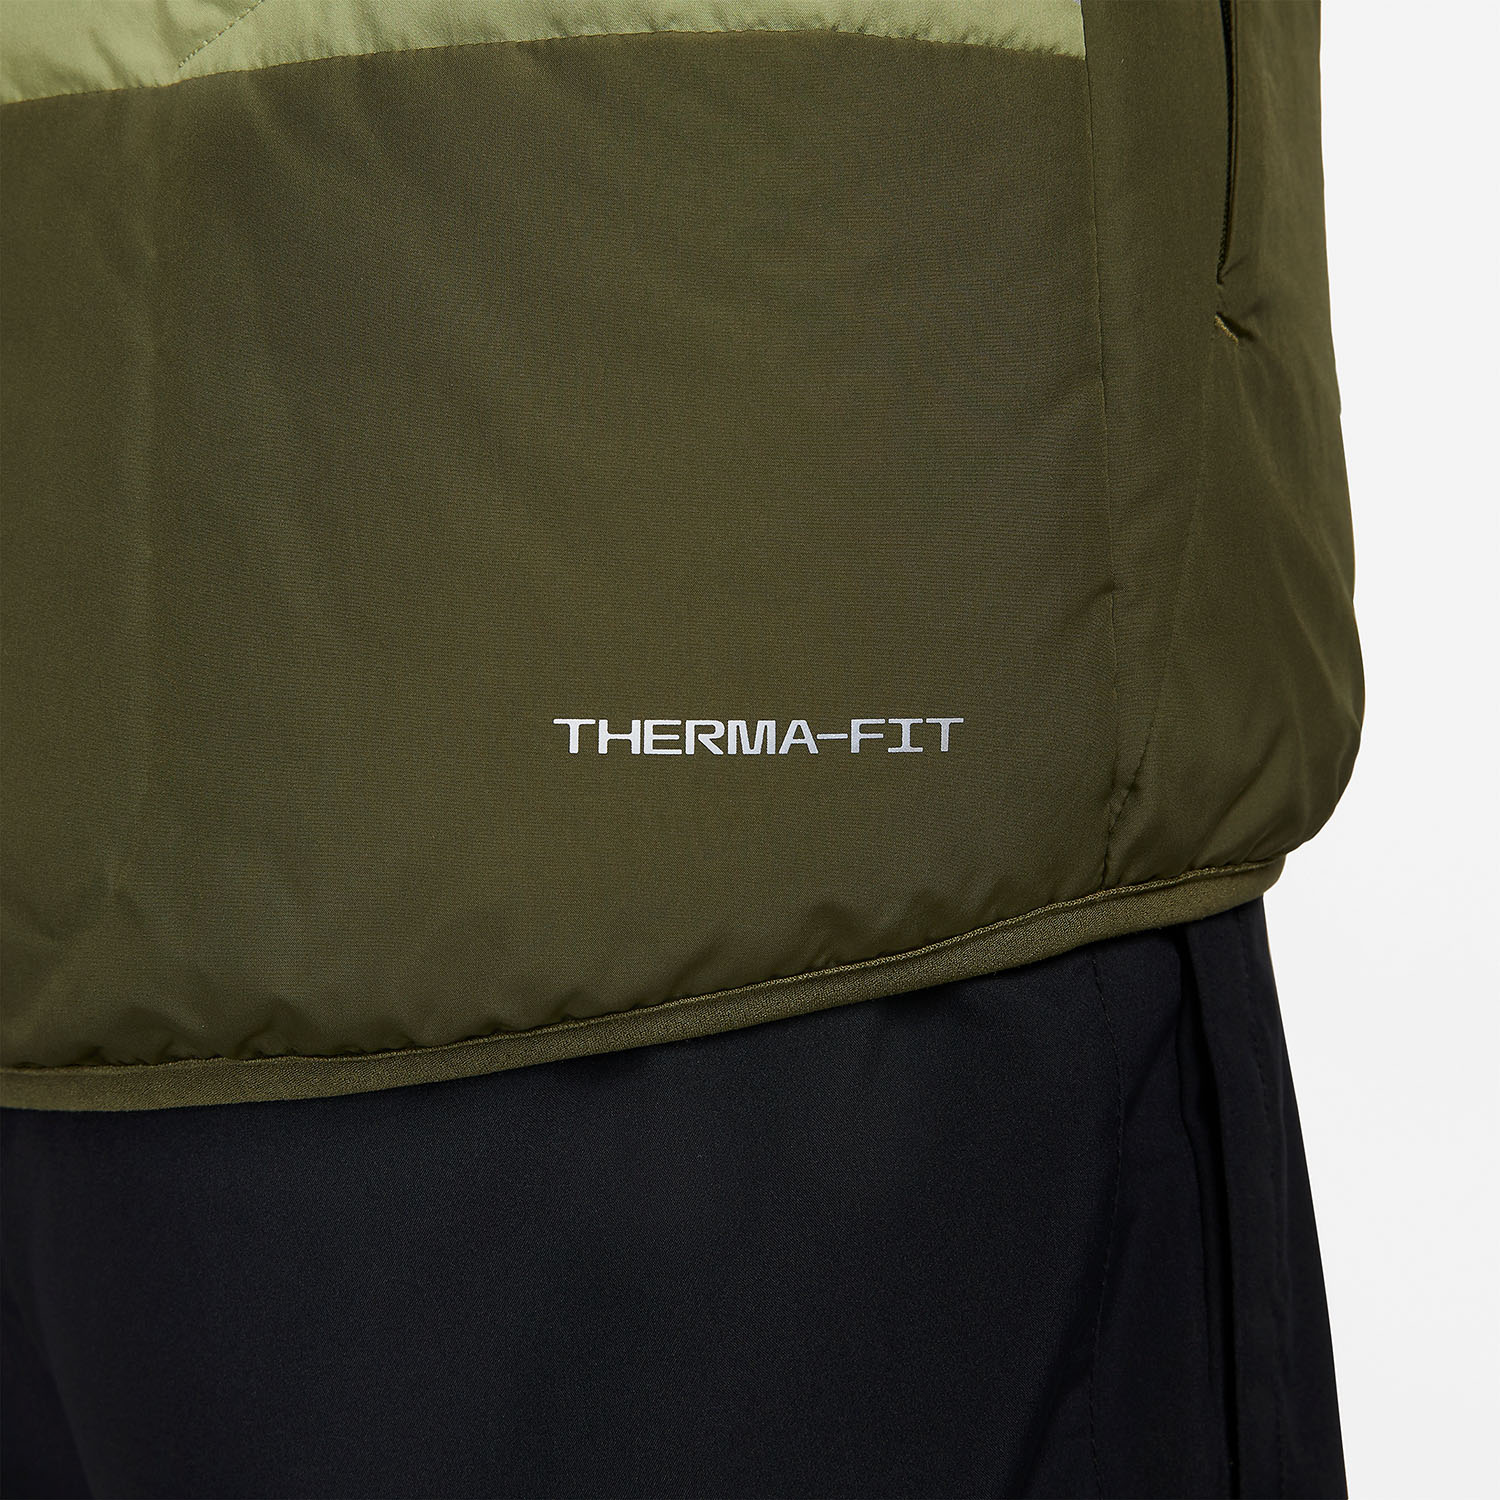 Nike Therma-FIT Repel Vest - Alligator/Rough Green/Reflective Silver